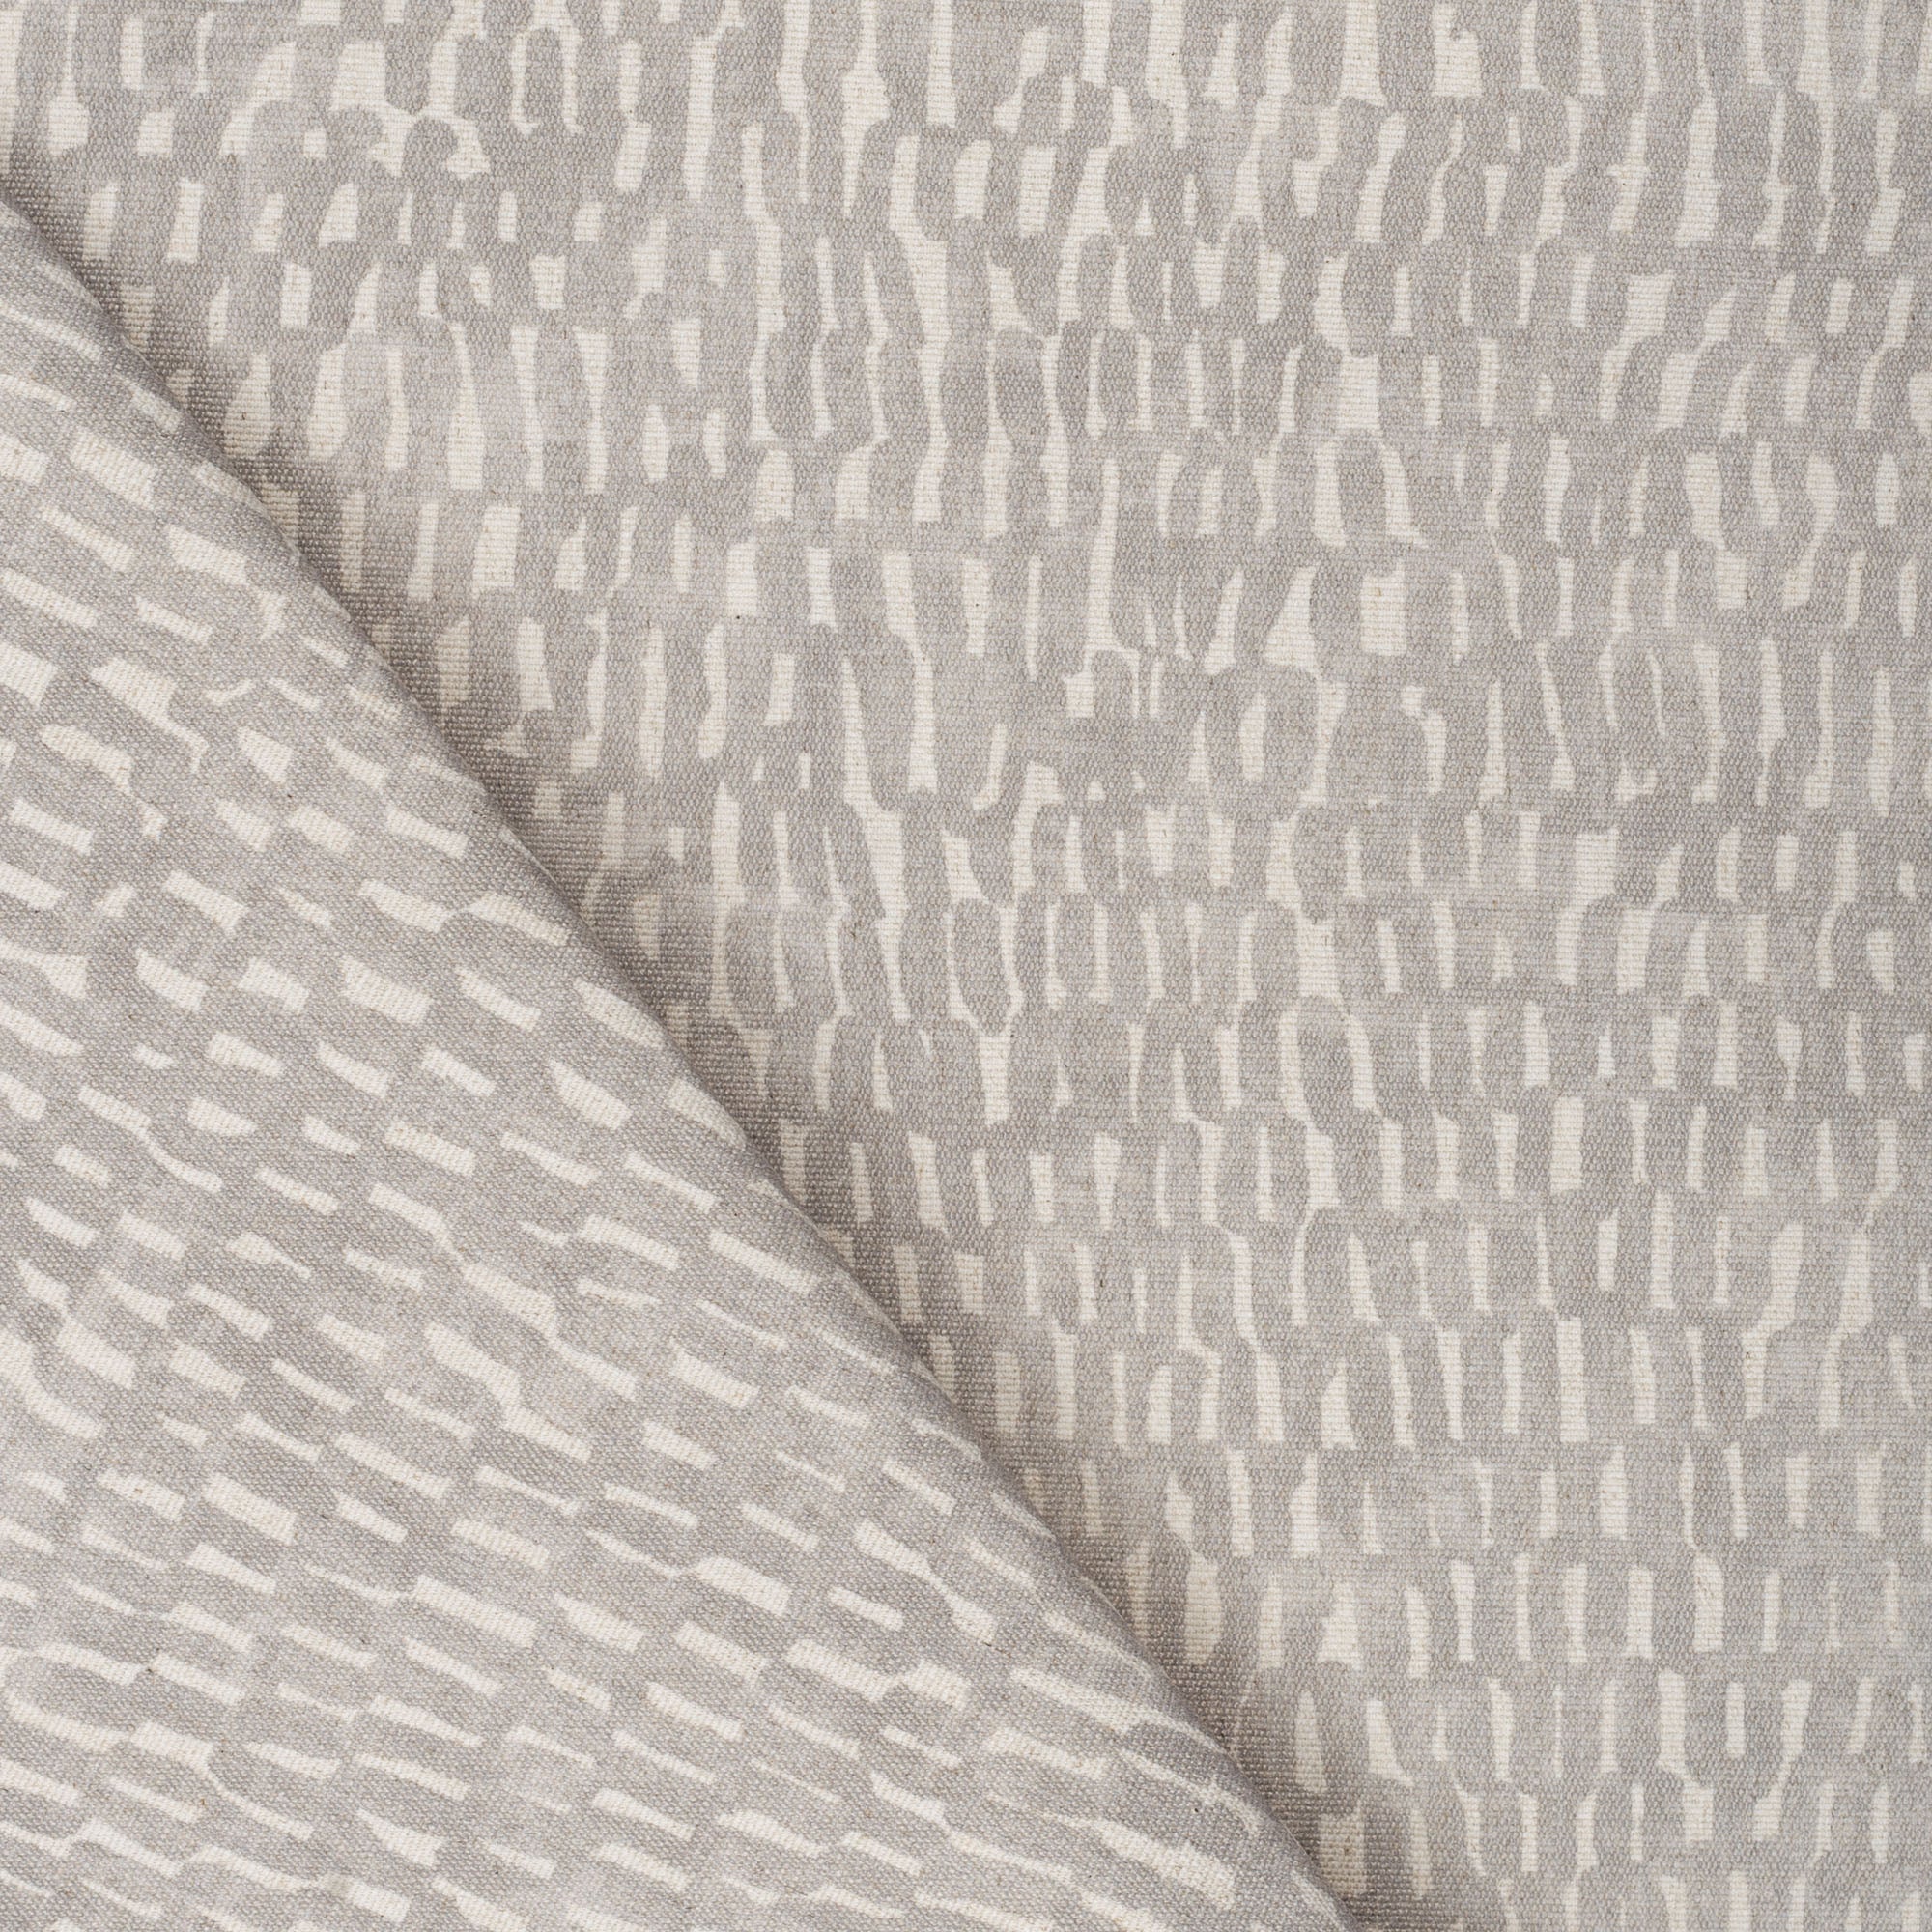 Avareno Silver, a light grey and sandy beige small scale abstract print fabric from Tonic Living 